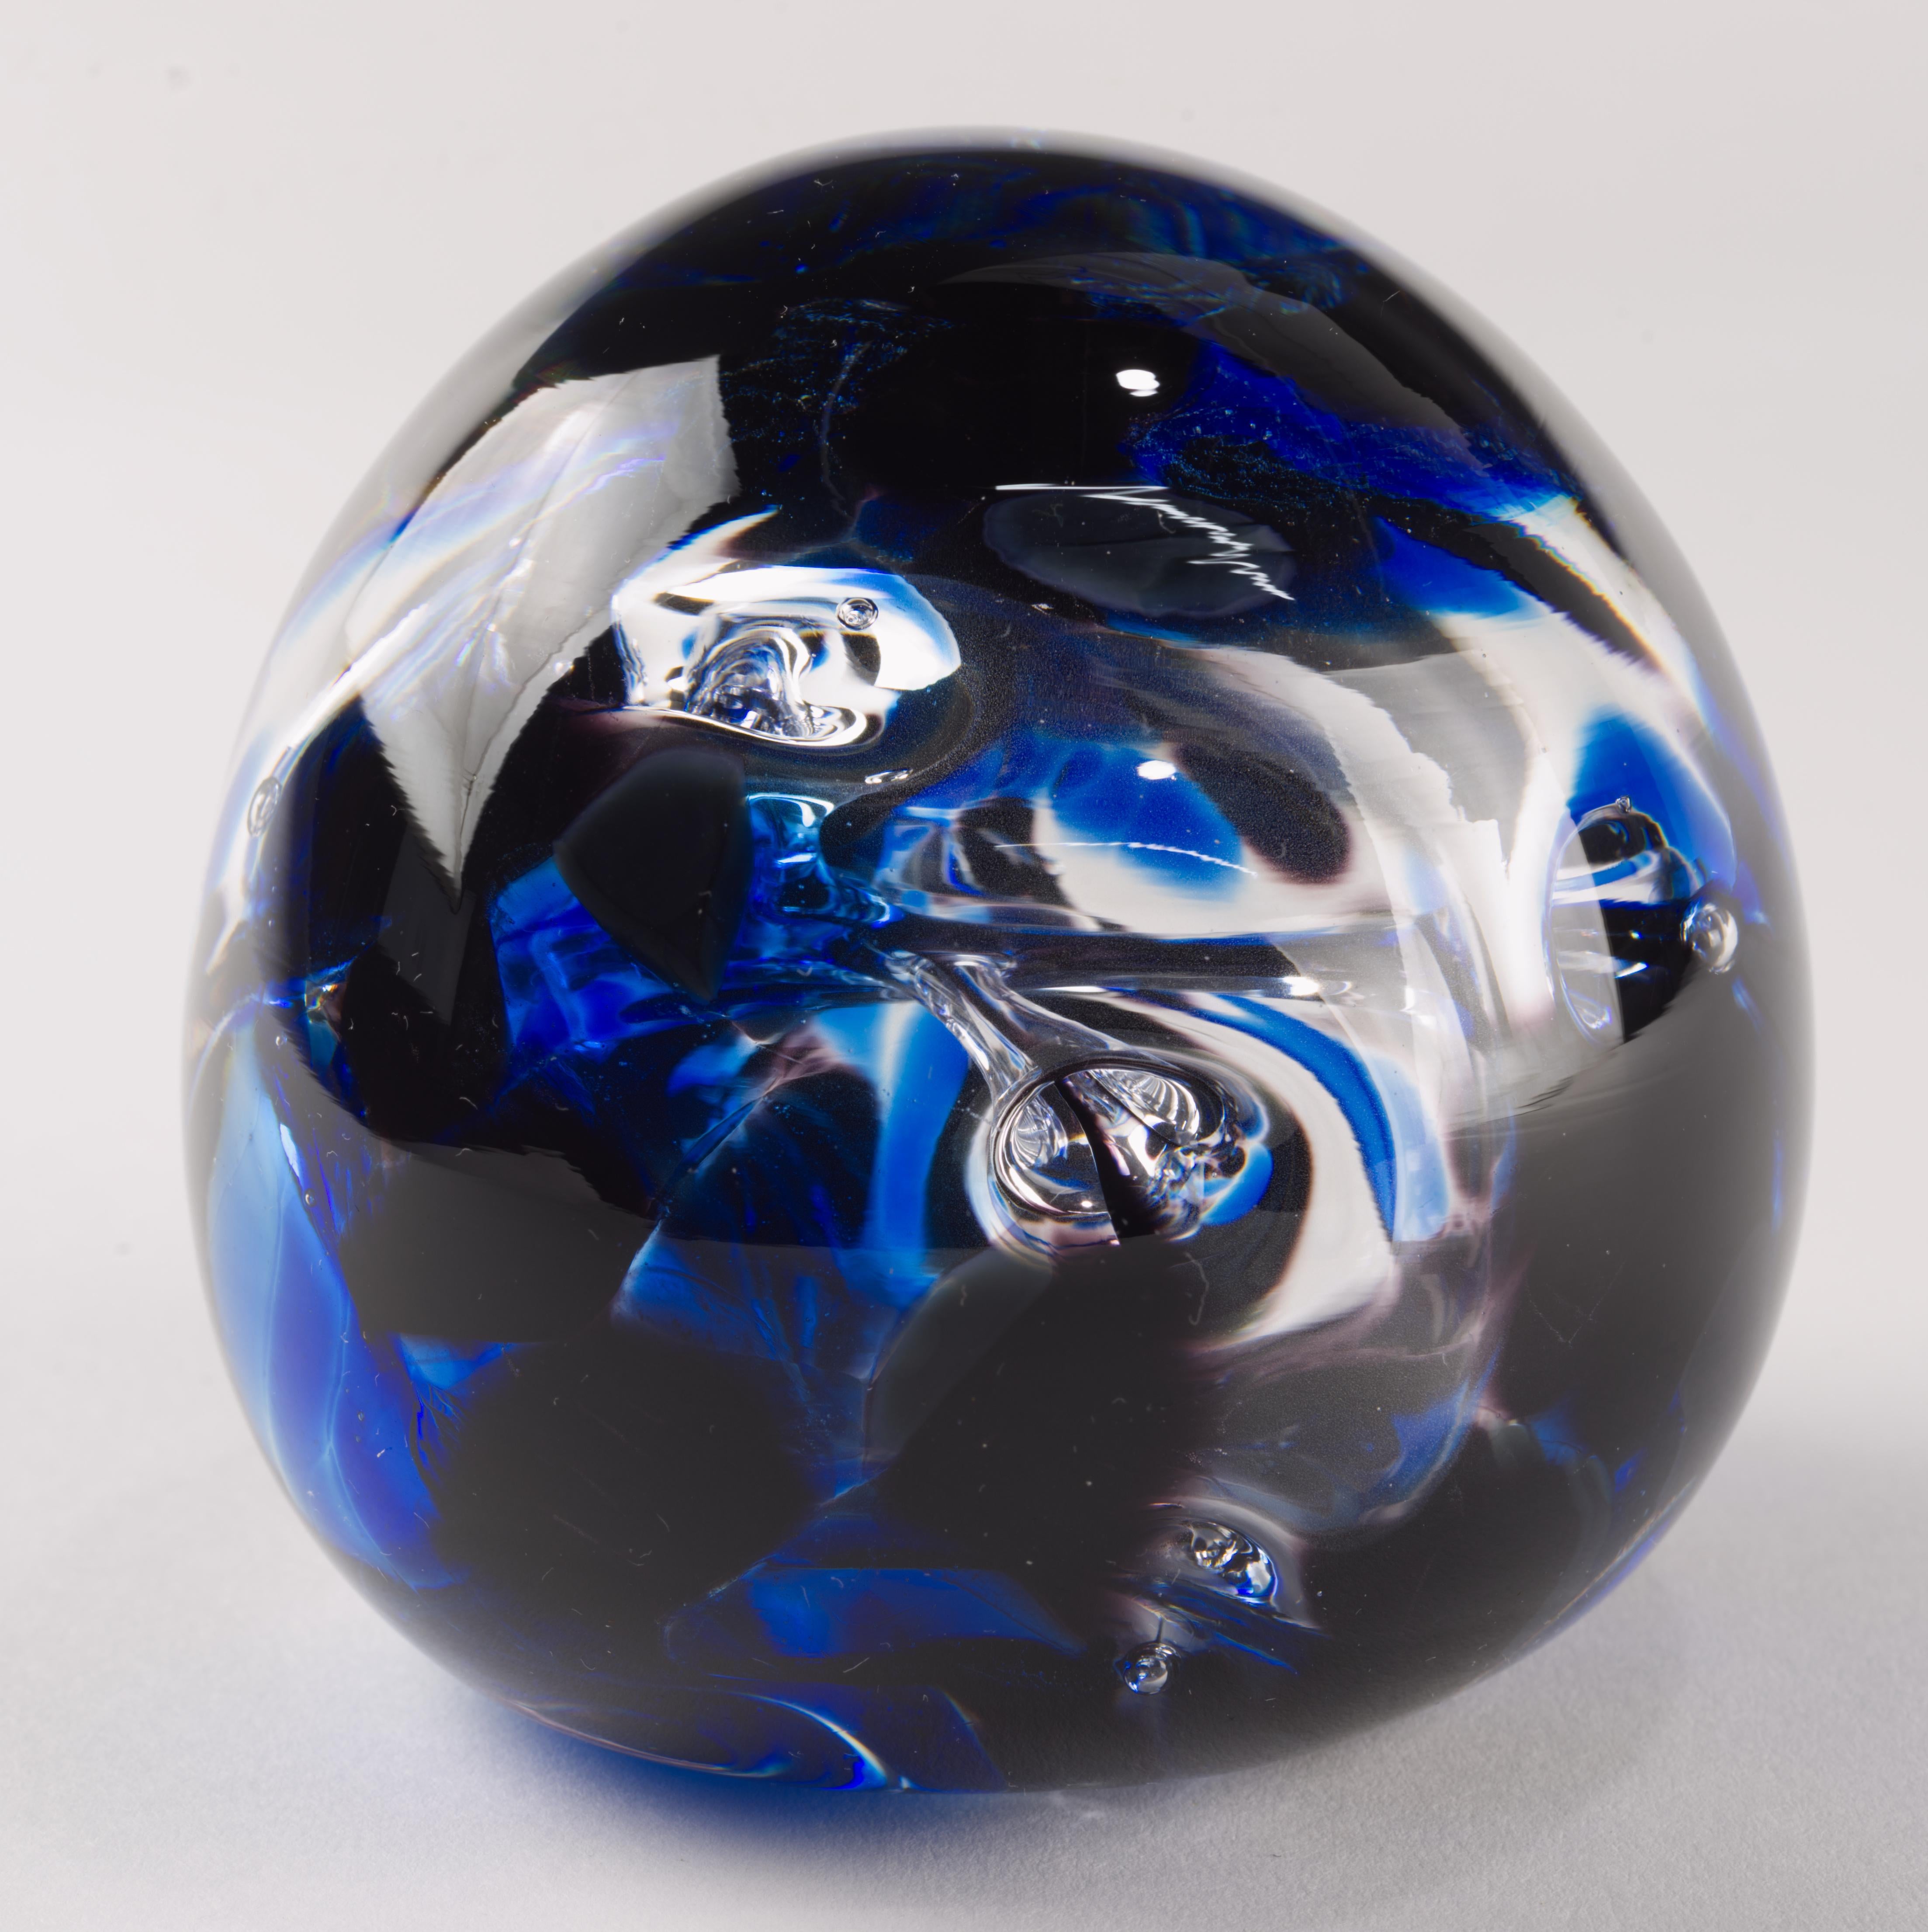  Large modern studio art glass paperweight in cobalt blue and clear glass with controlled bubbles forming an abstract biomorphic shaped element within the piece is handmade and signed by the artist on the bottom. 

The paperweight is 3